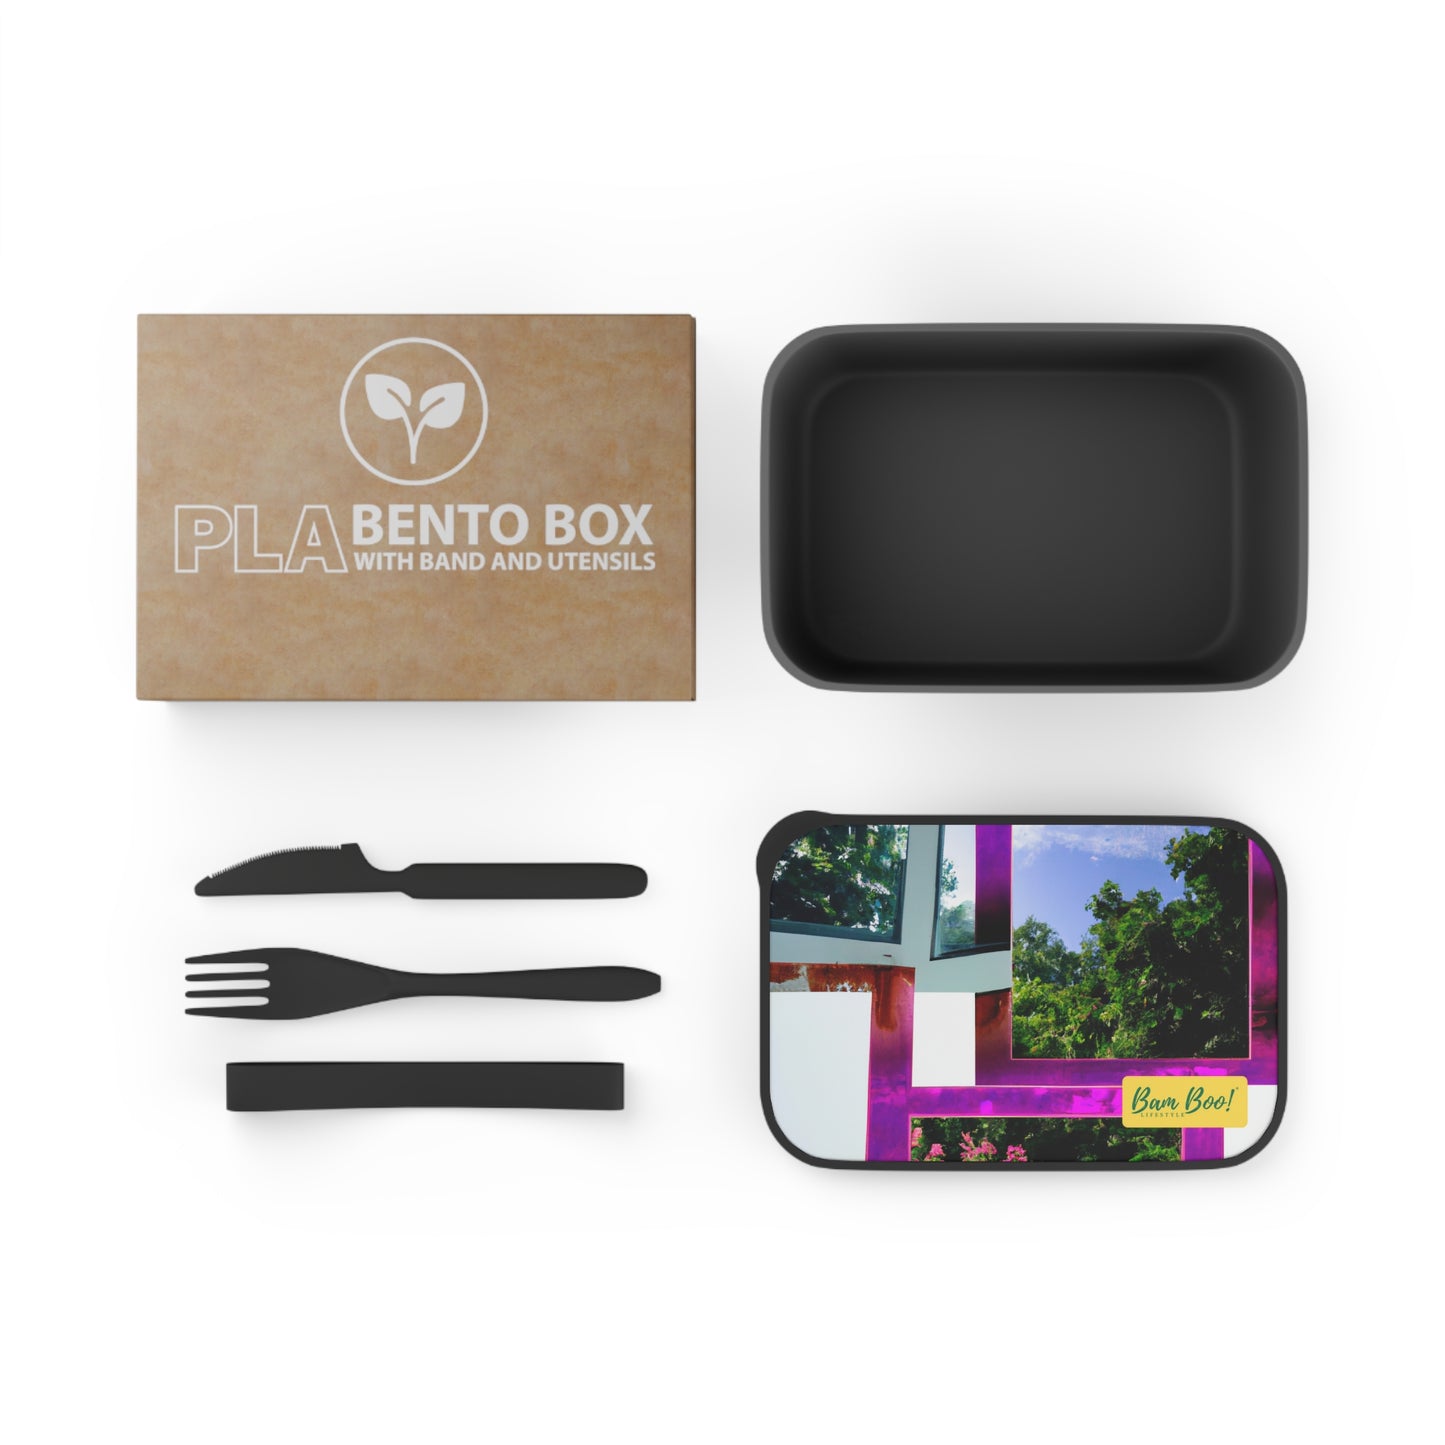 "Nature's Fascinating Splendor" - Bam Boo! Lifestyle PLA Bento Box with Band and Utensils